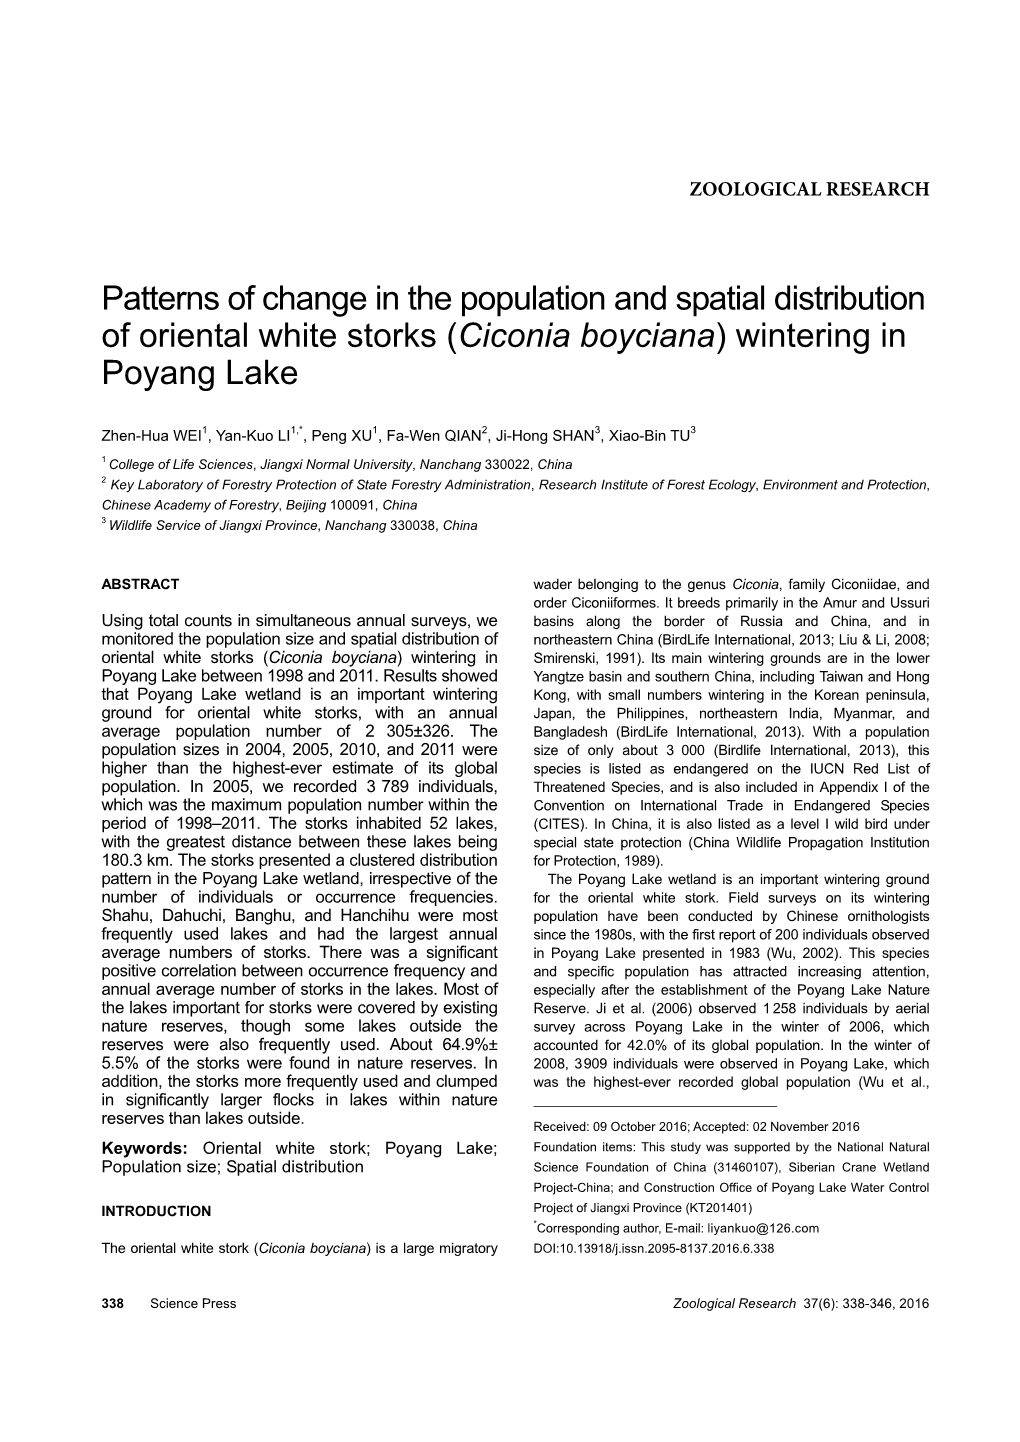 Patterns of Change in the Population and Spatial Distribution of Oriental White Storks (Ciconia Boyciana) Wintering in Poyang Lake